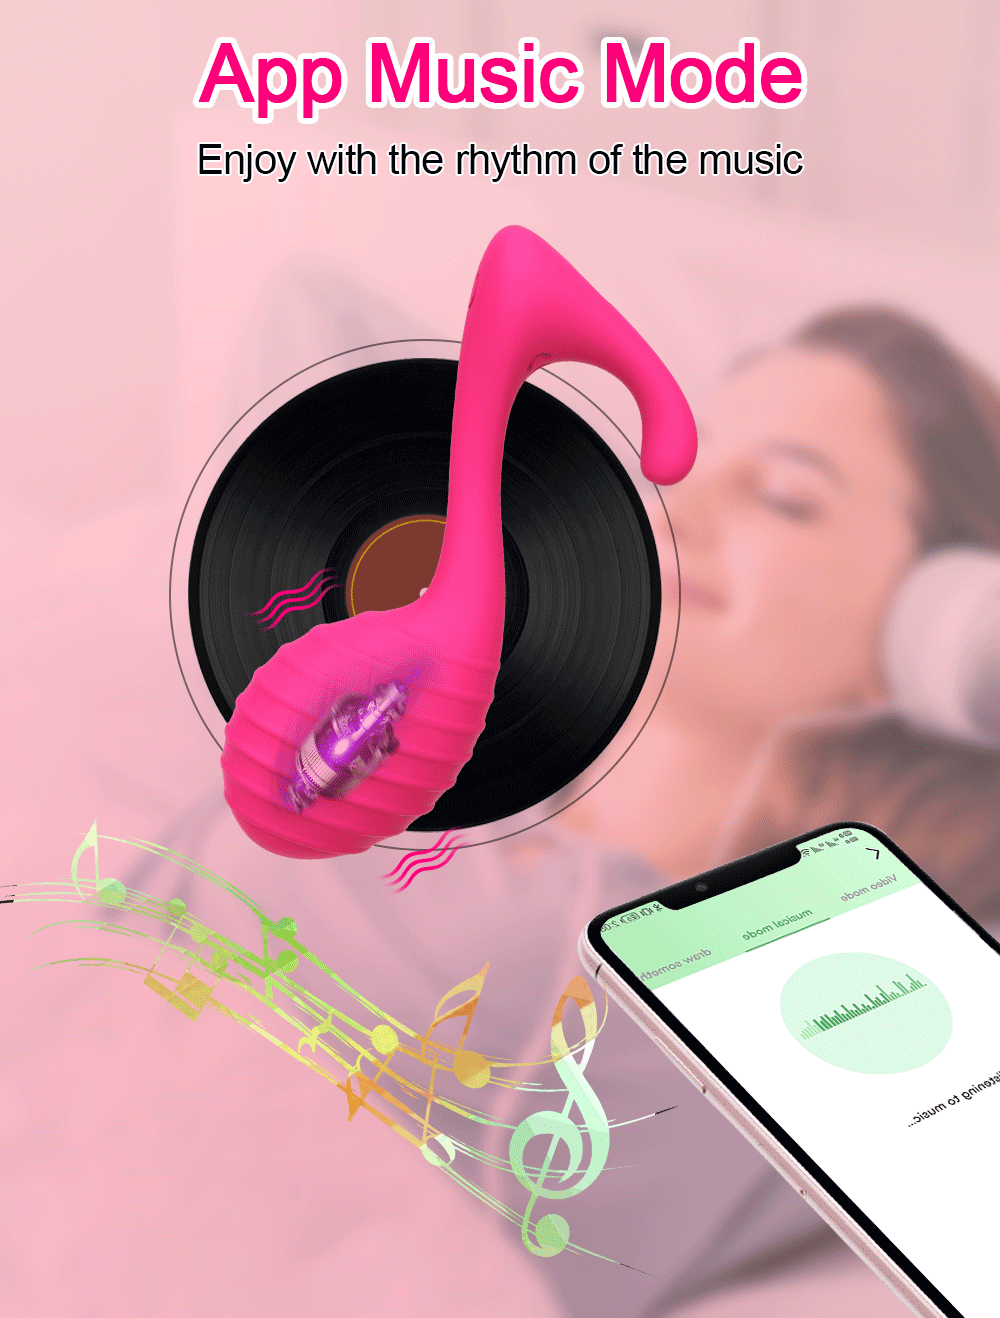 Bluetooth Dildo Vibrators for Women Orgasm Wireless APP Remote Control G spot Panties Vibrating Eggs Sex Toys for Adults Couples Ac9c2f2ab95fd4ad8816ad3060f93e19aB